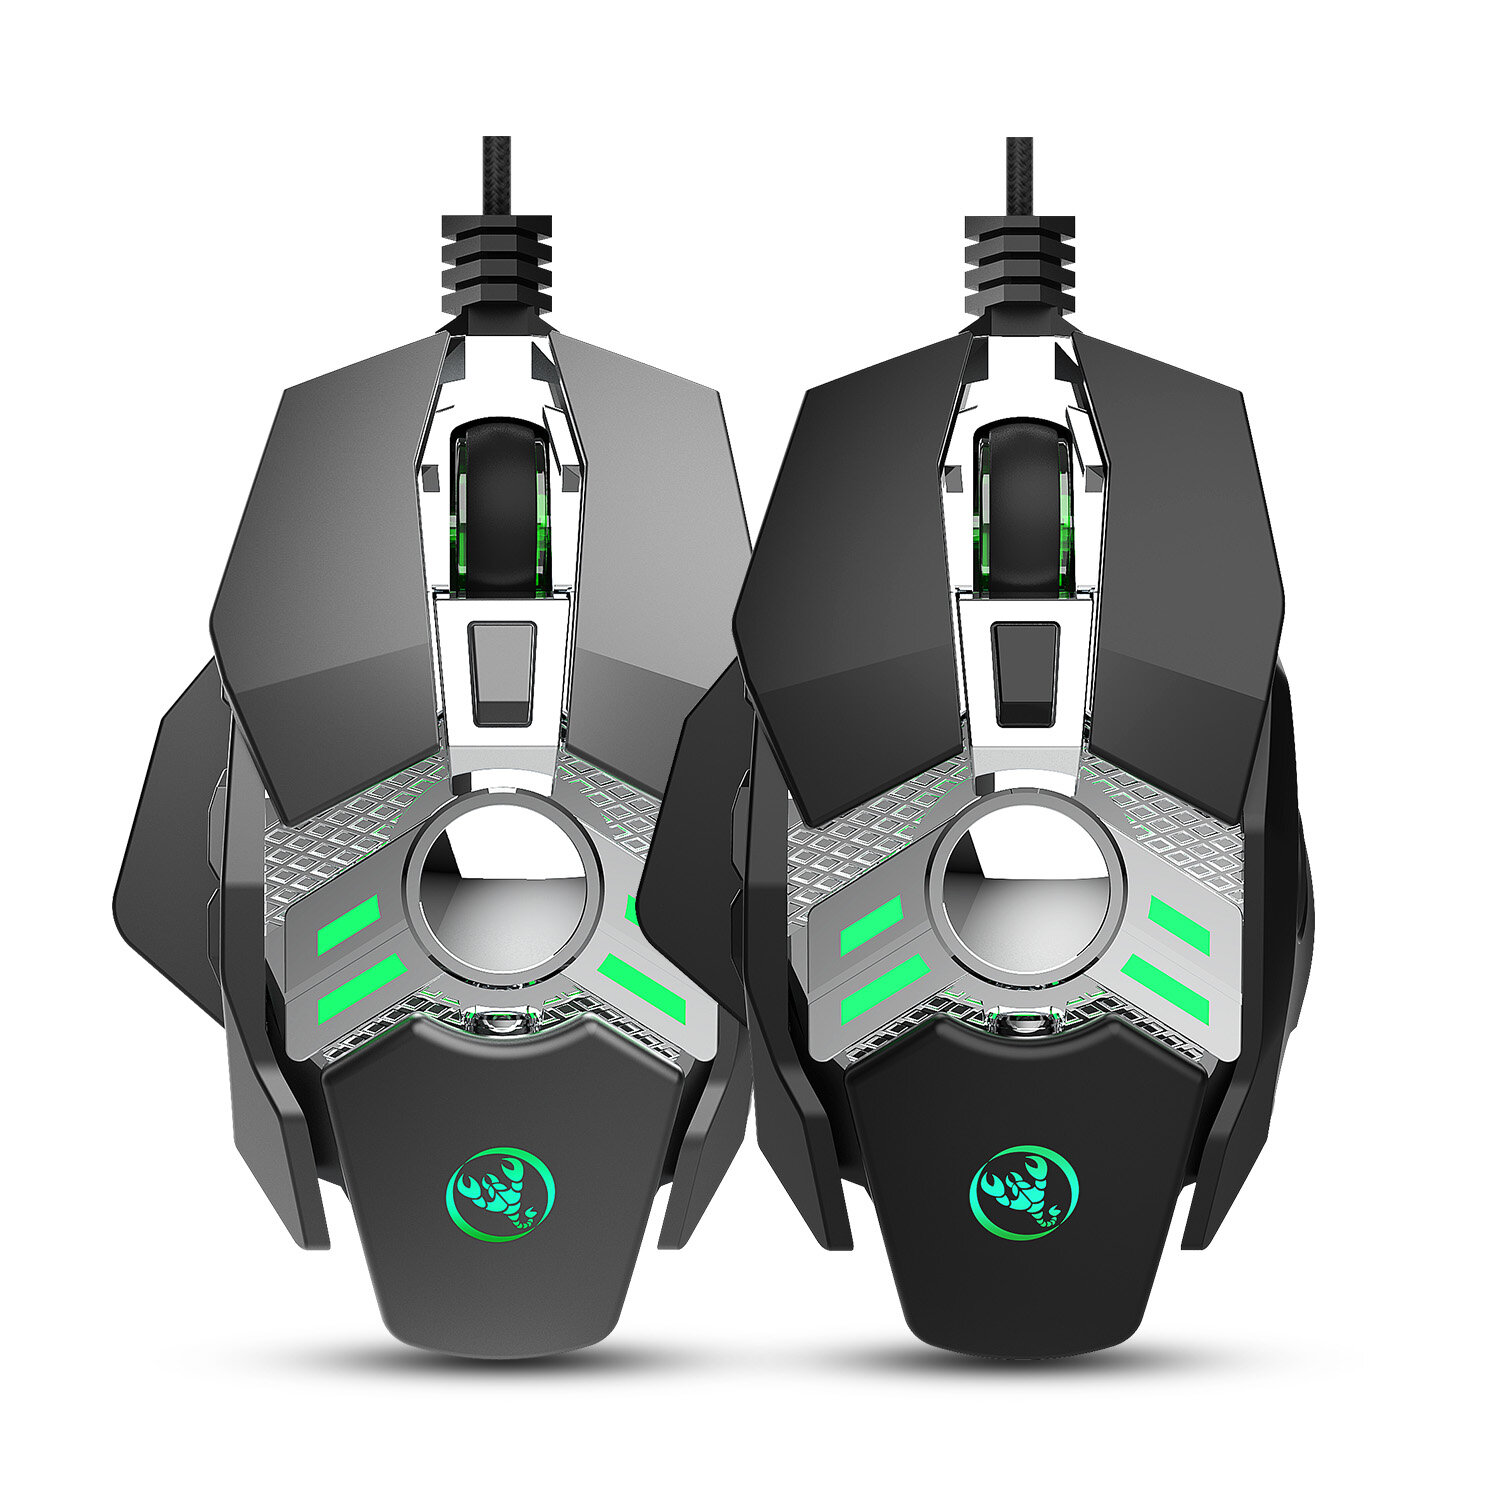 

HXSJ J200 Wired Gaming Mouse 6400 DPI Seven-key Macro Programming Settings Mouse with Four Adjustable DPI RGB Light For